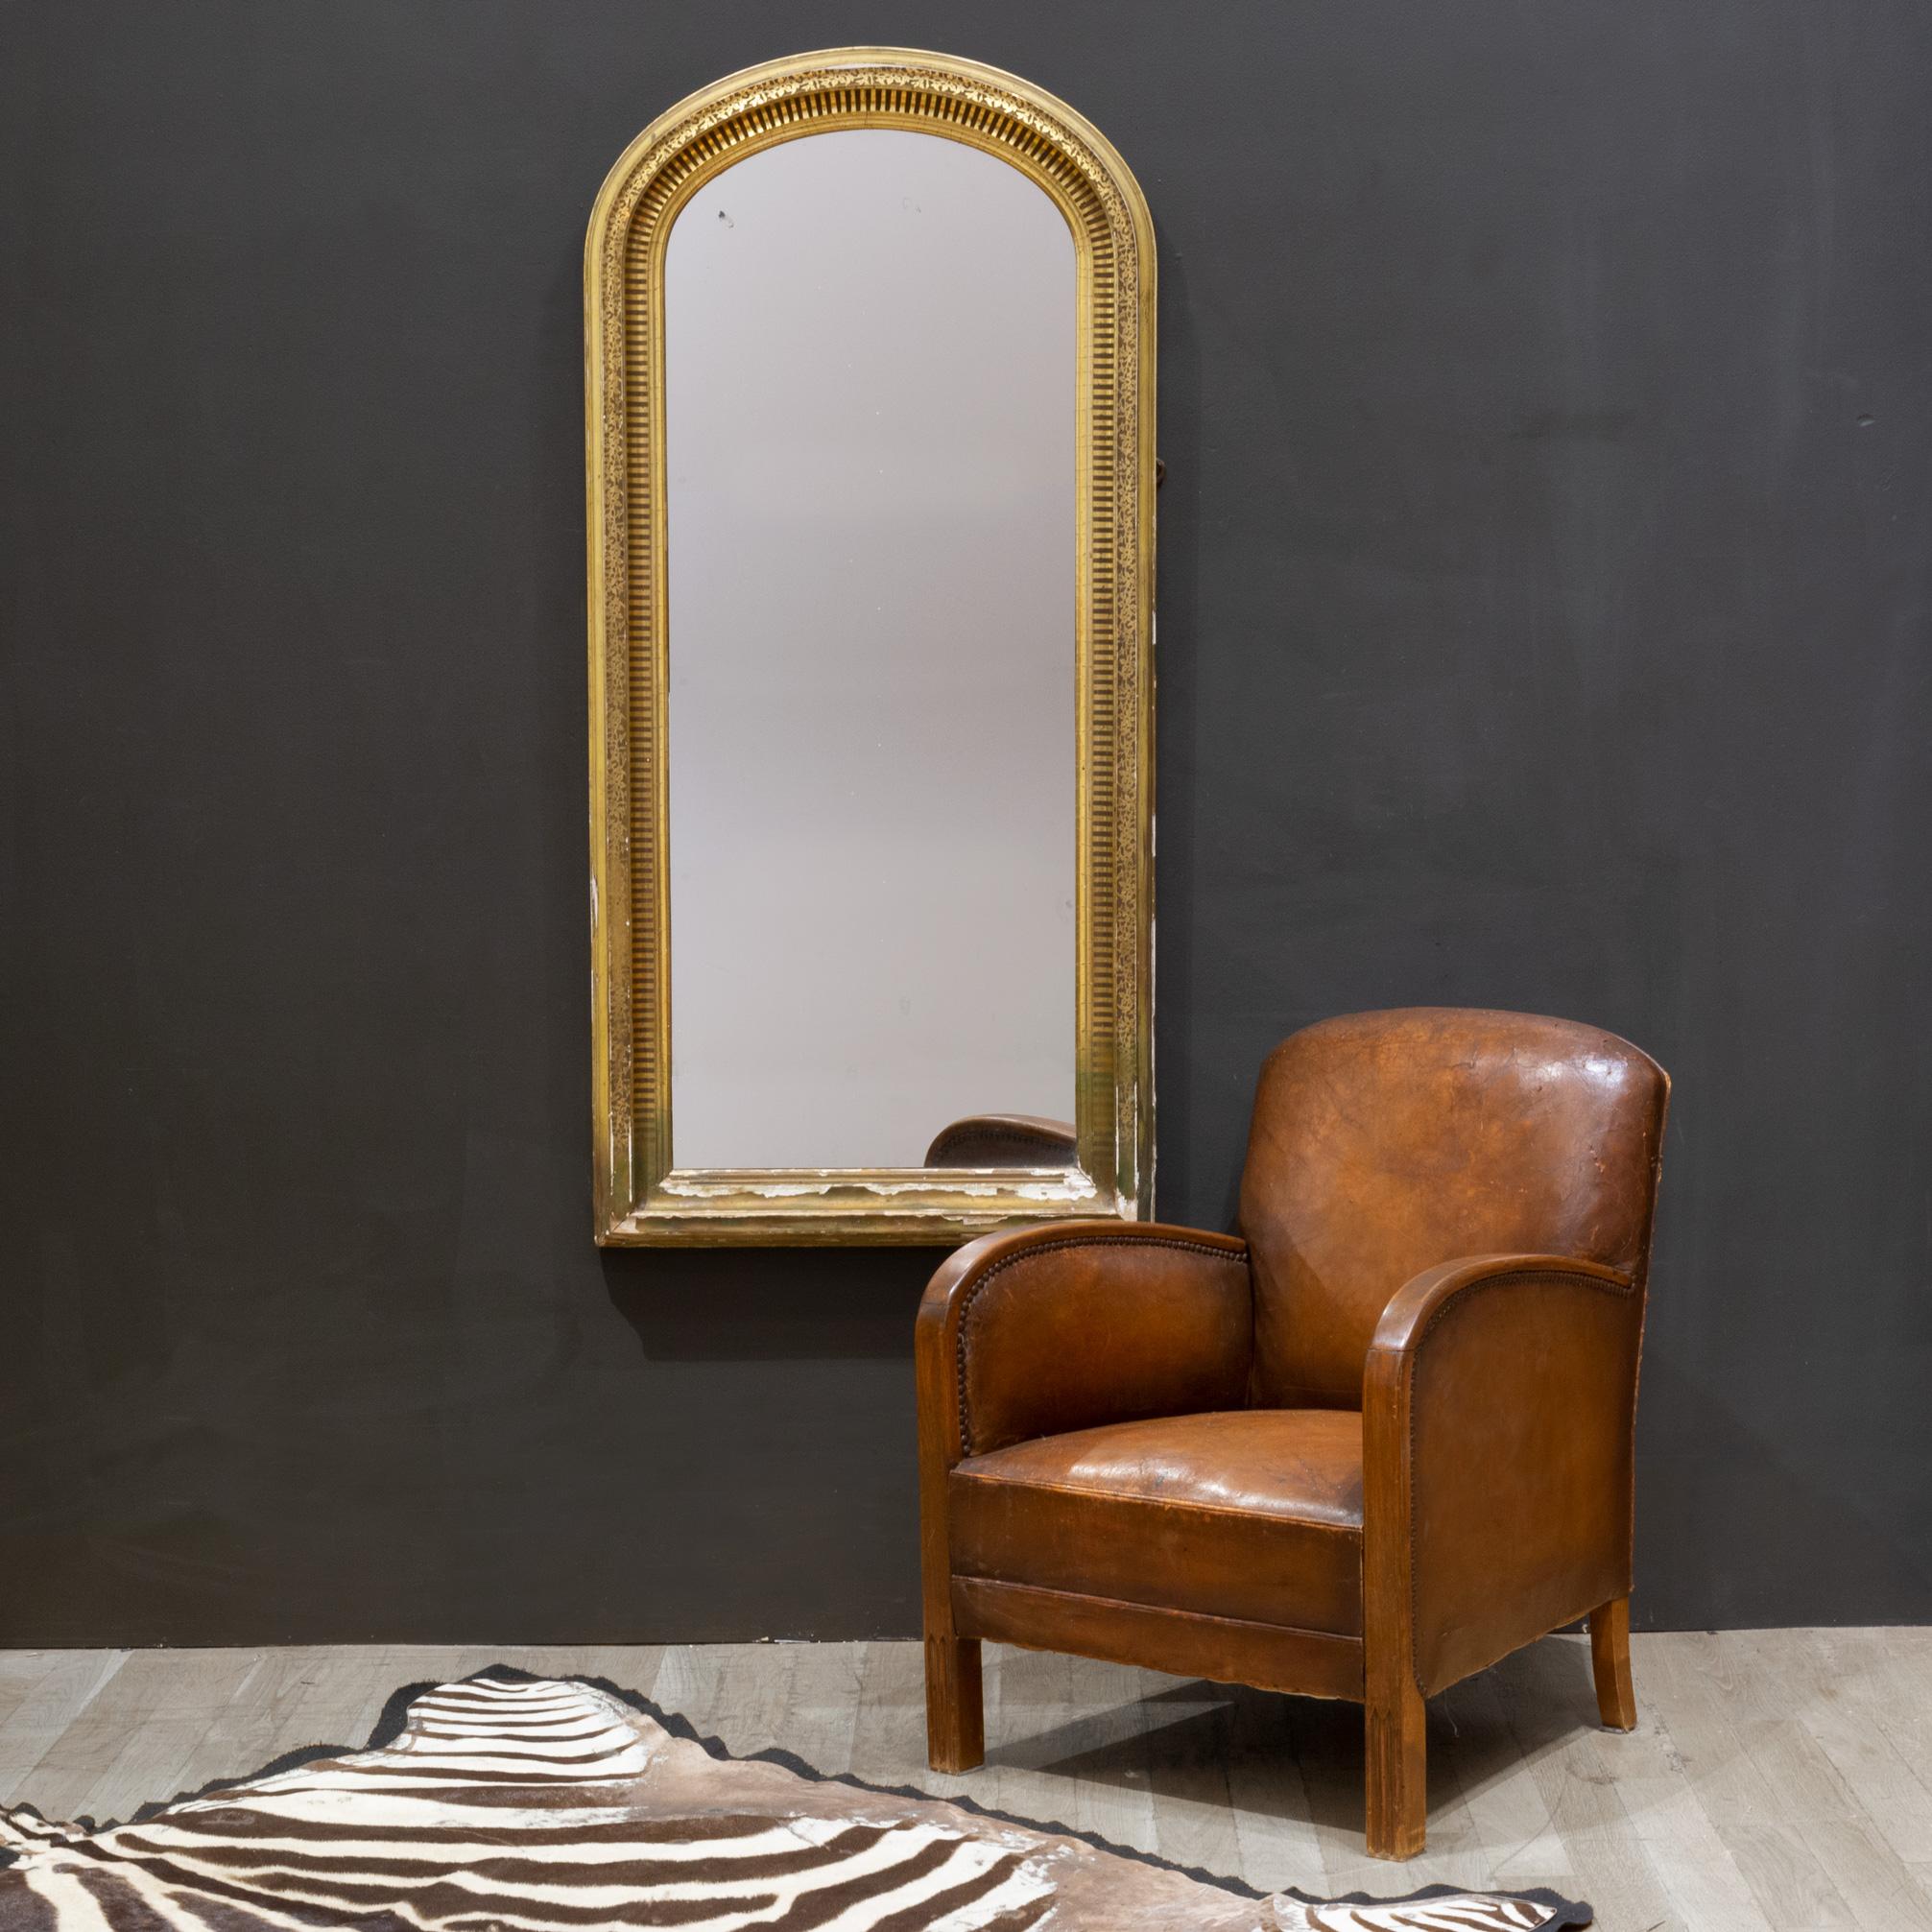 ABOUT

Contact us for more shipping options: S16 Home San Francisco. 

An antique French Louis Philippe mirror with curved top corners, gold plate finish, floral etched and inner striped pattern. Original mirror and wooden back.

    CREATOR